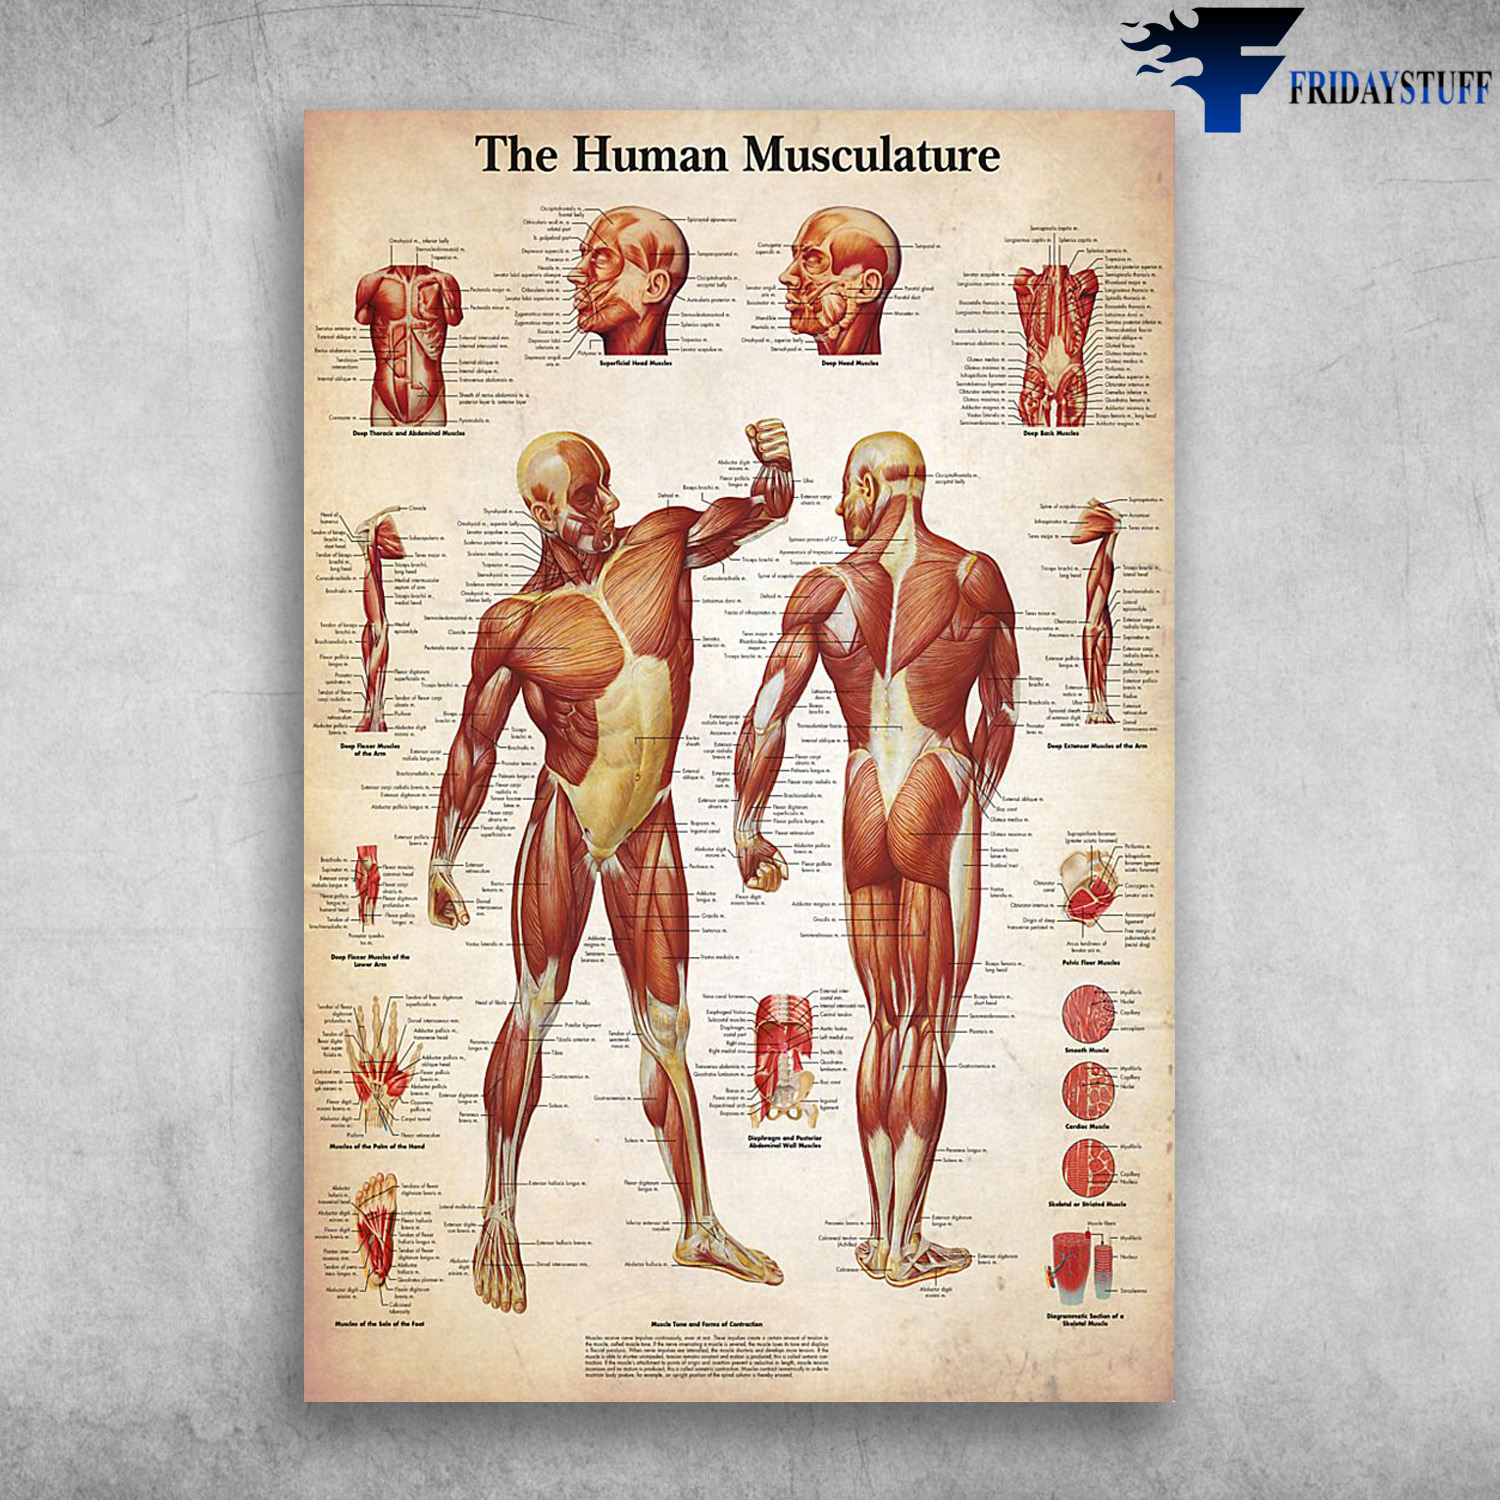 The Human Musculature - Manial Therapy Human Muscle, Human Body